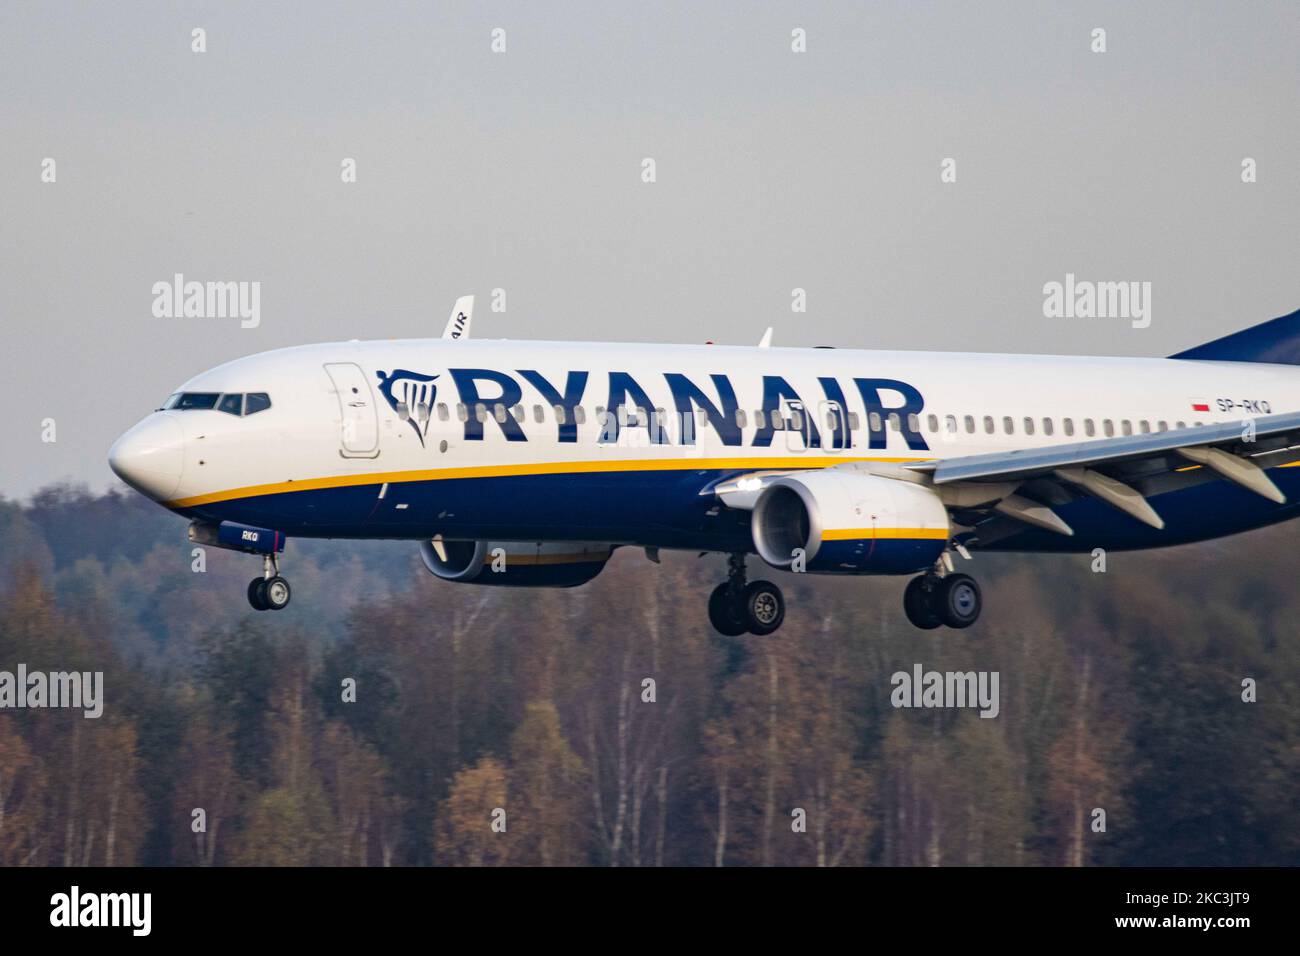 A Ryanair Boeing 737-800 aircraft as seen on final approach flying, touching down and taxiing in Eindhoven EIN EHEH Airport in the Netherlands. The narrow body airplane has the registration SP-RKQ and belongs to Buzz Airline, a Polish carrier headquartered in Warsaw. Formerly called Ryanair Sun a subsidiary of the Irish low cost budget airline company Ryanair. The flights and passenger traffic in Eindhoven is reduced because of the Covid-19 Coronavirus pandemic and the lockdowns applied in multiple European Countries. Eindhoven, Netherlands on November 8, 2020 (Photo by Nicolas Economou/NurPho Stock Photo